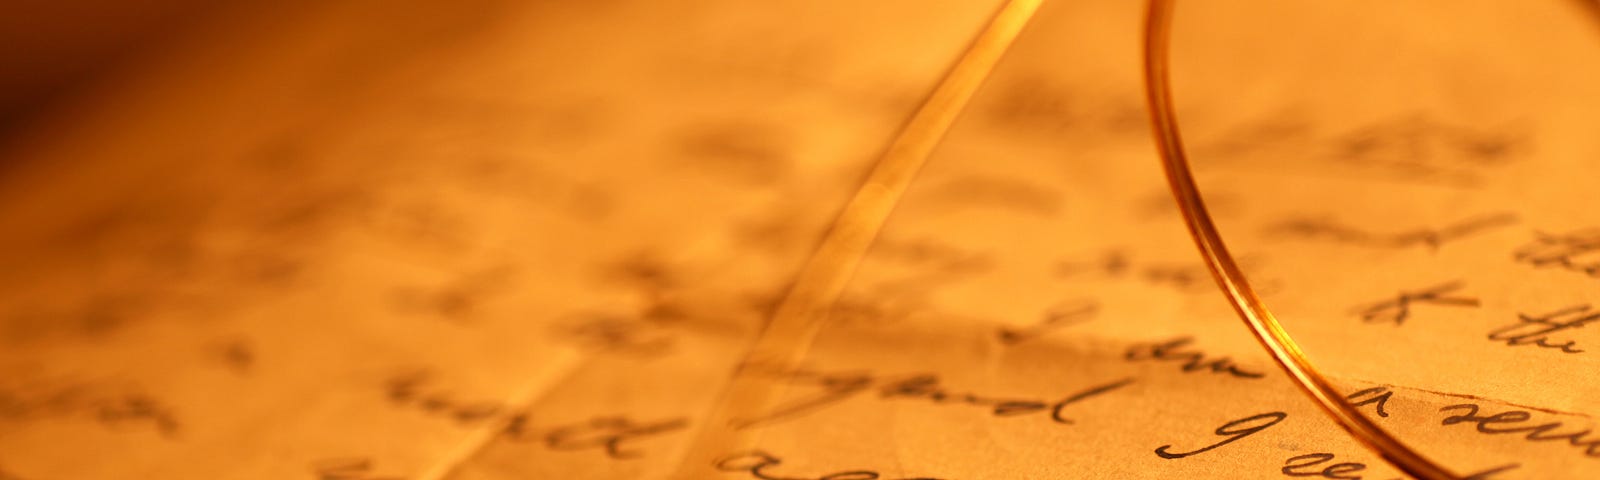 Closeup of glasses on a page scribbled with words.